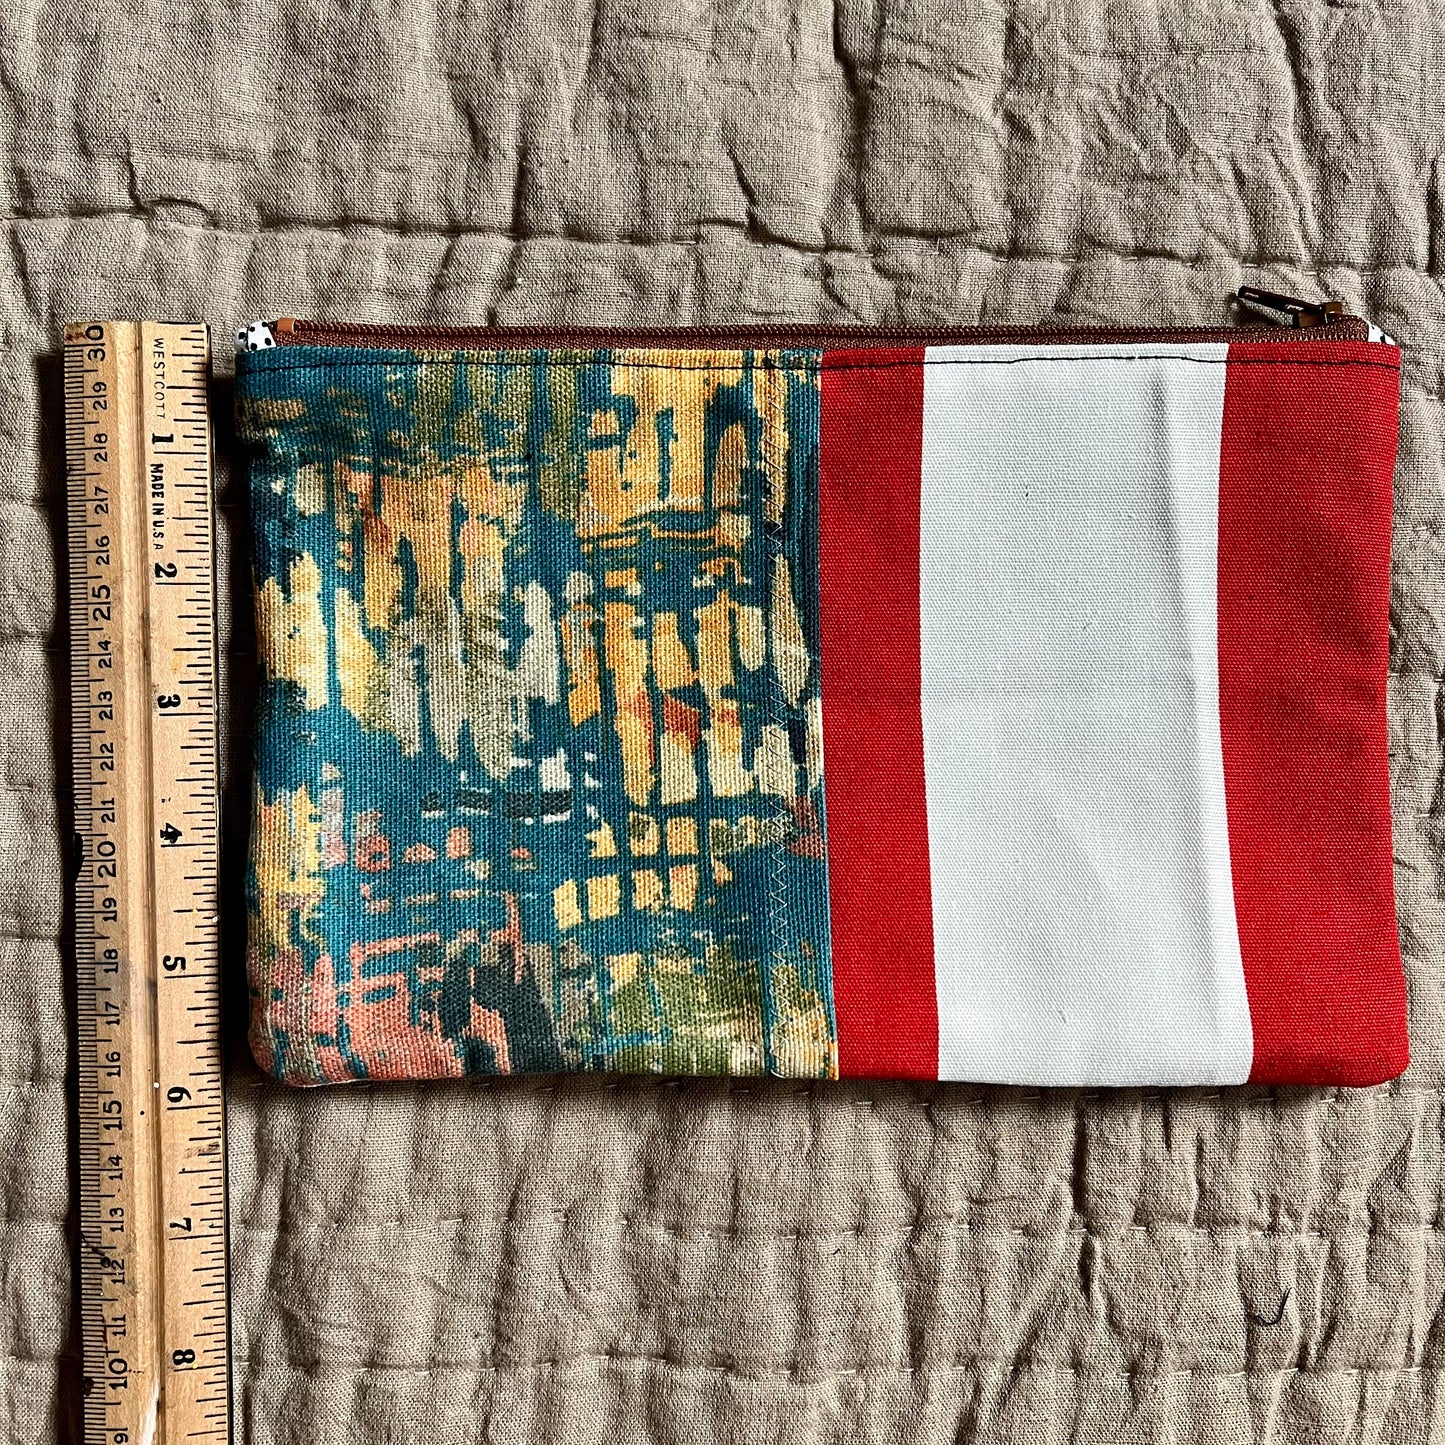 back of zipper pouch, with ruler on the side, showing about 6 inches in height.